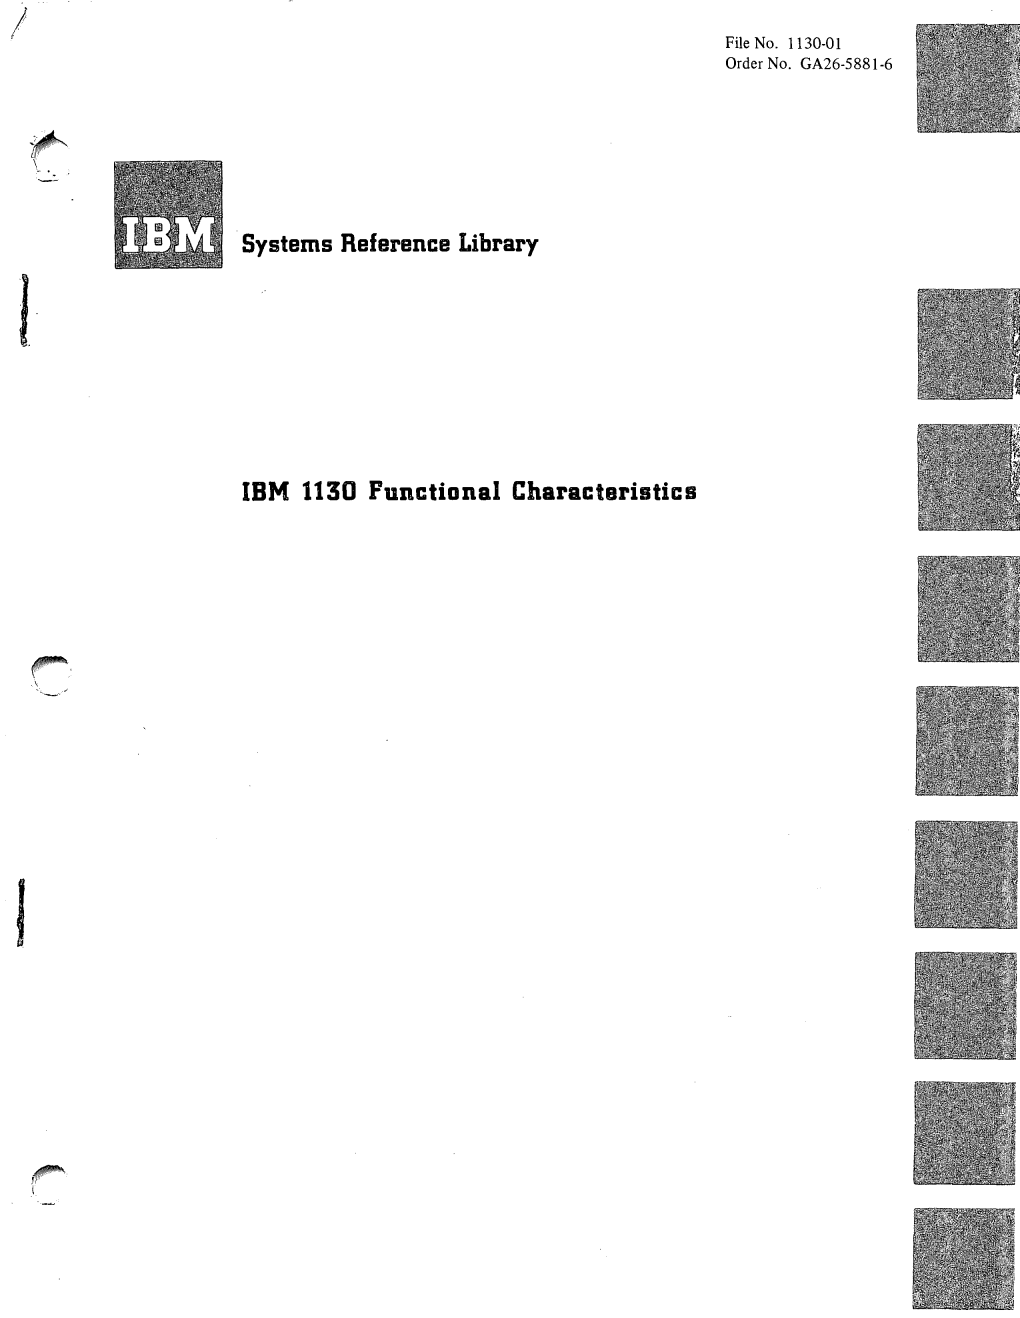 Systems Reference Library IBM 1130 Functional Characteristics